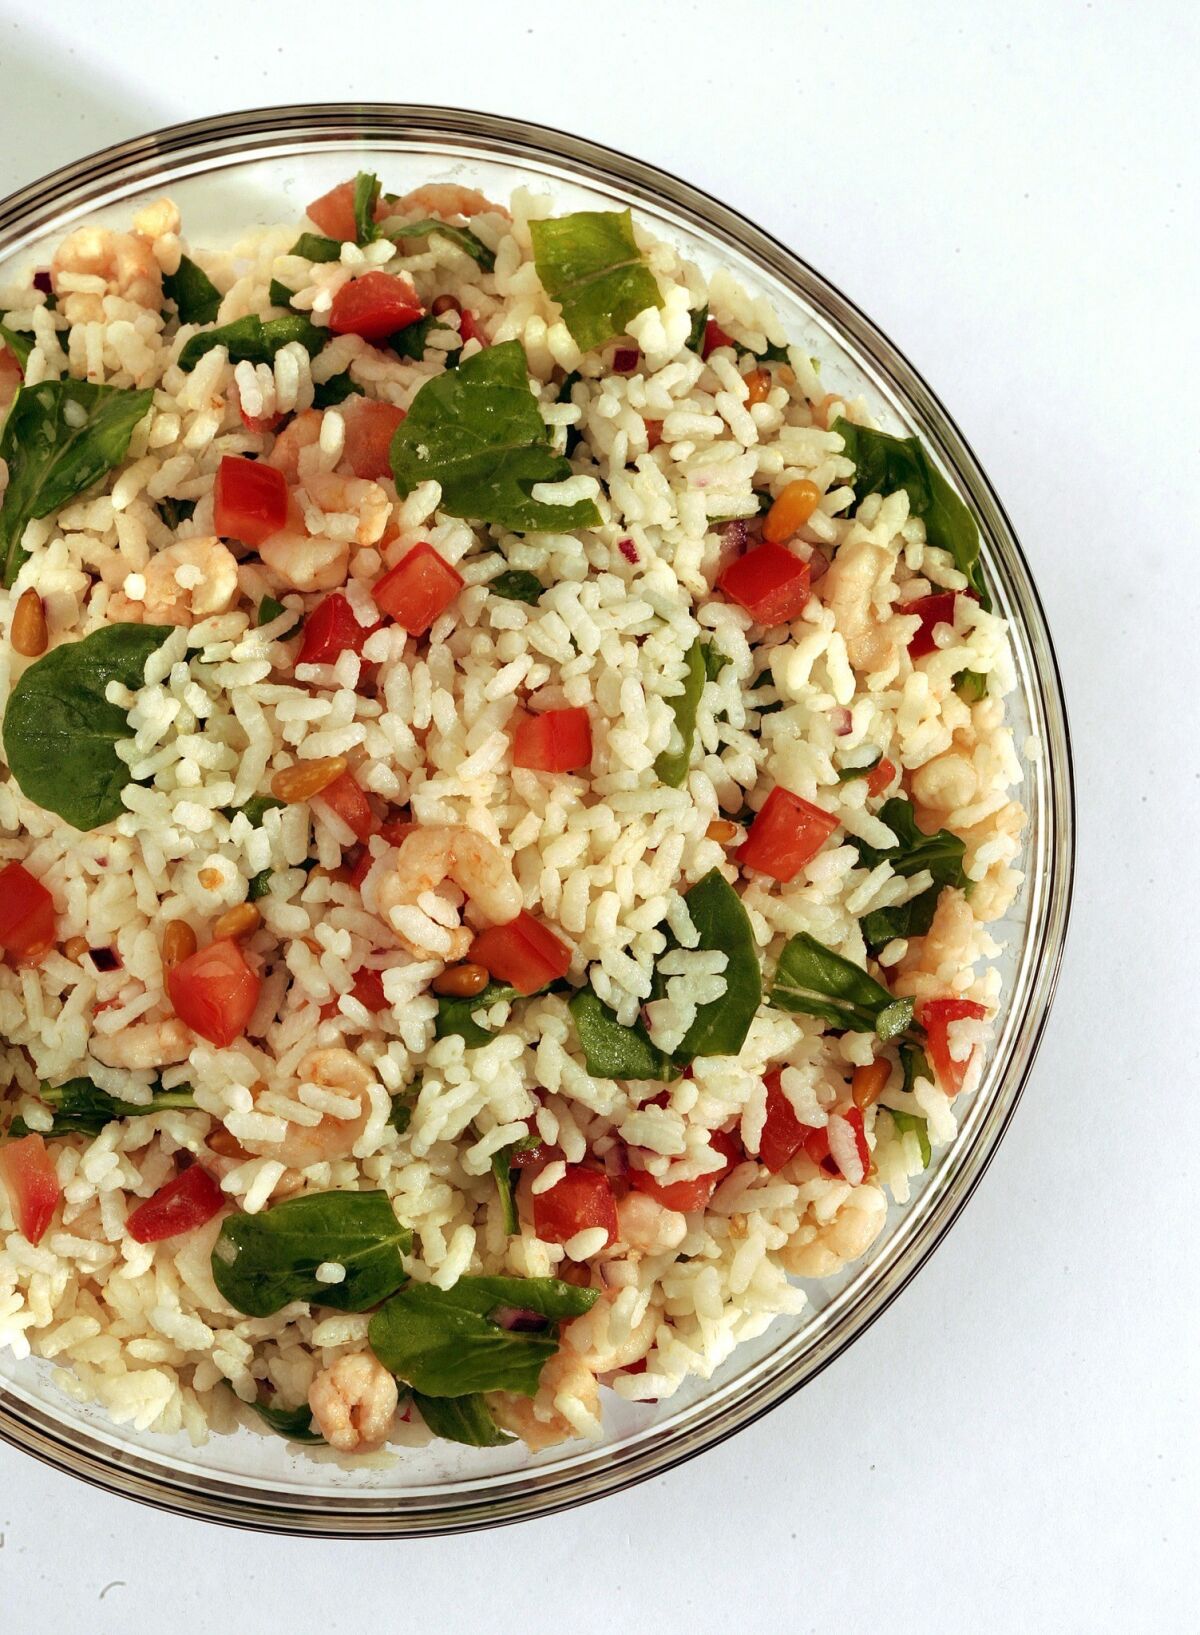 Recipe: Rice salad with arugula and tomatoes.